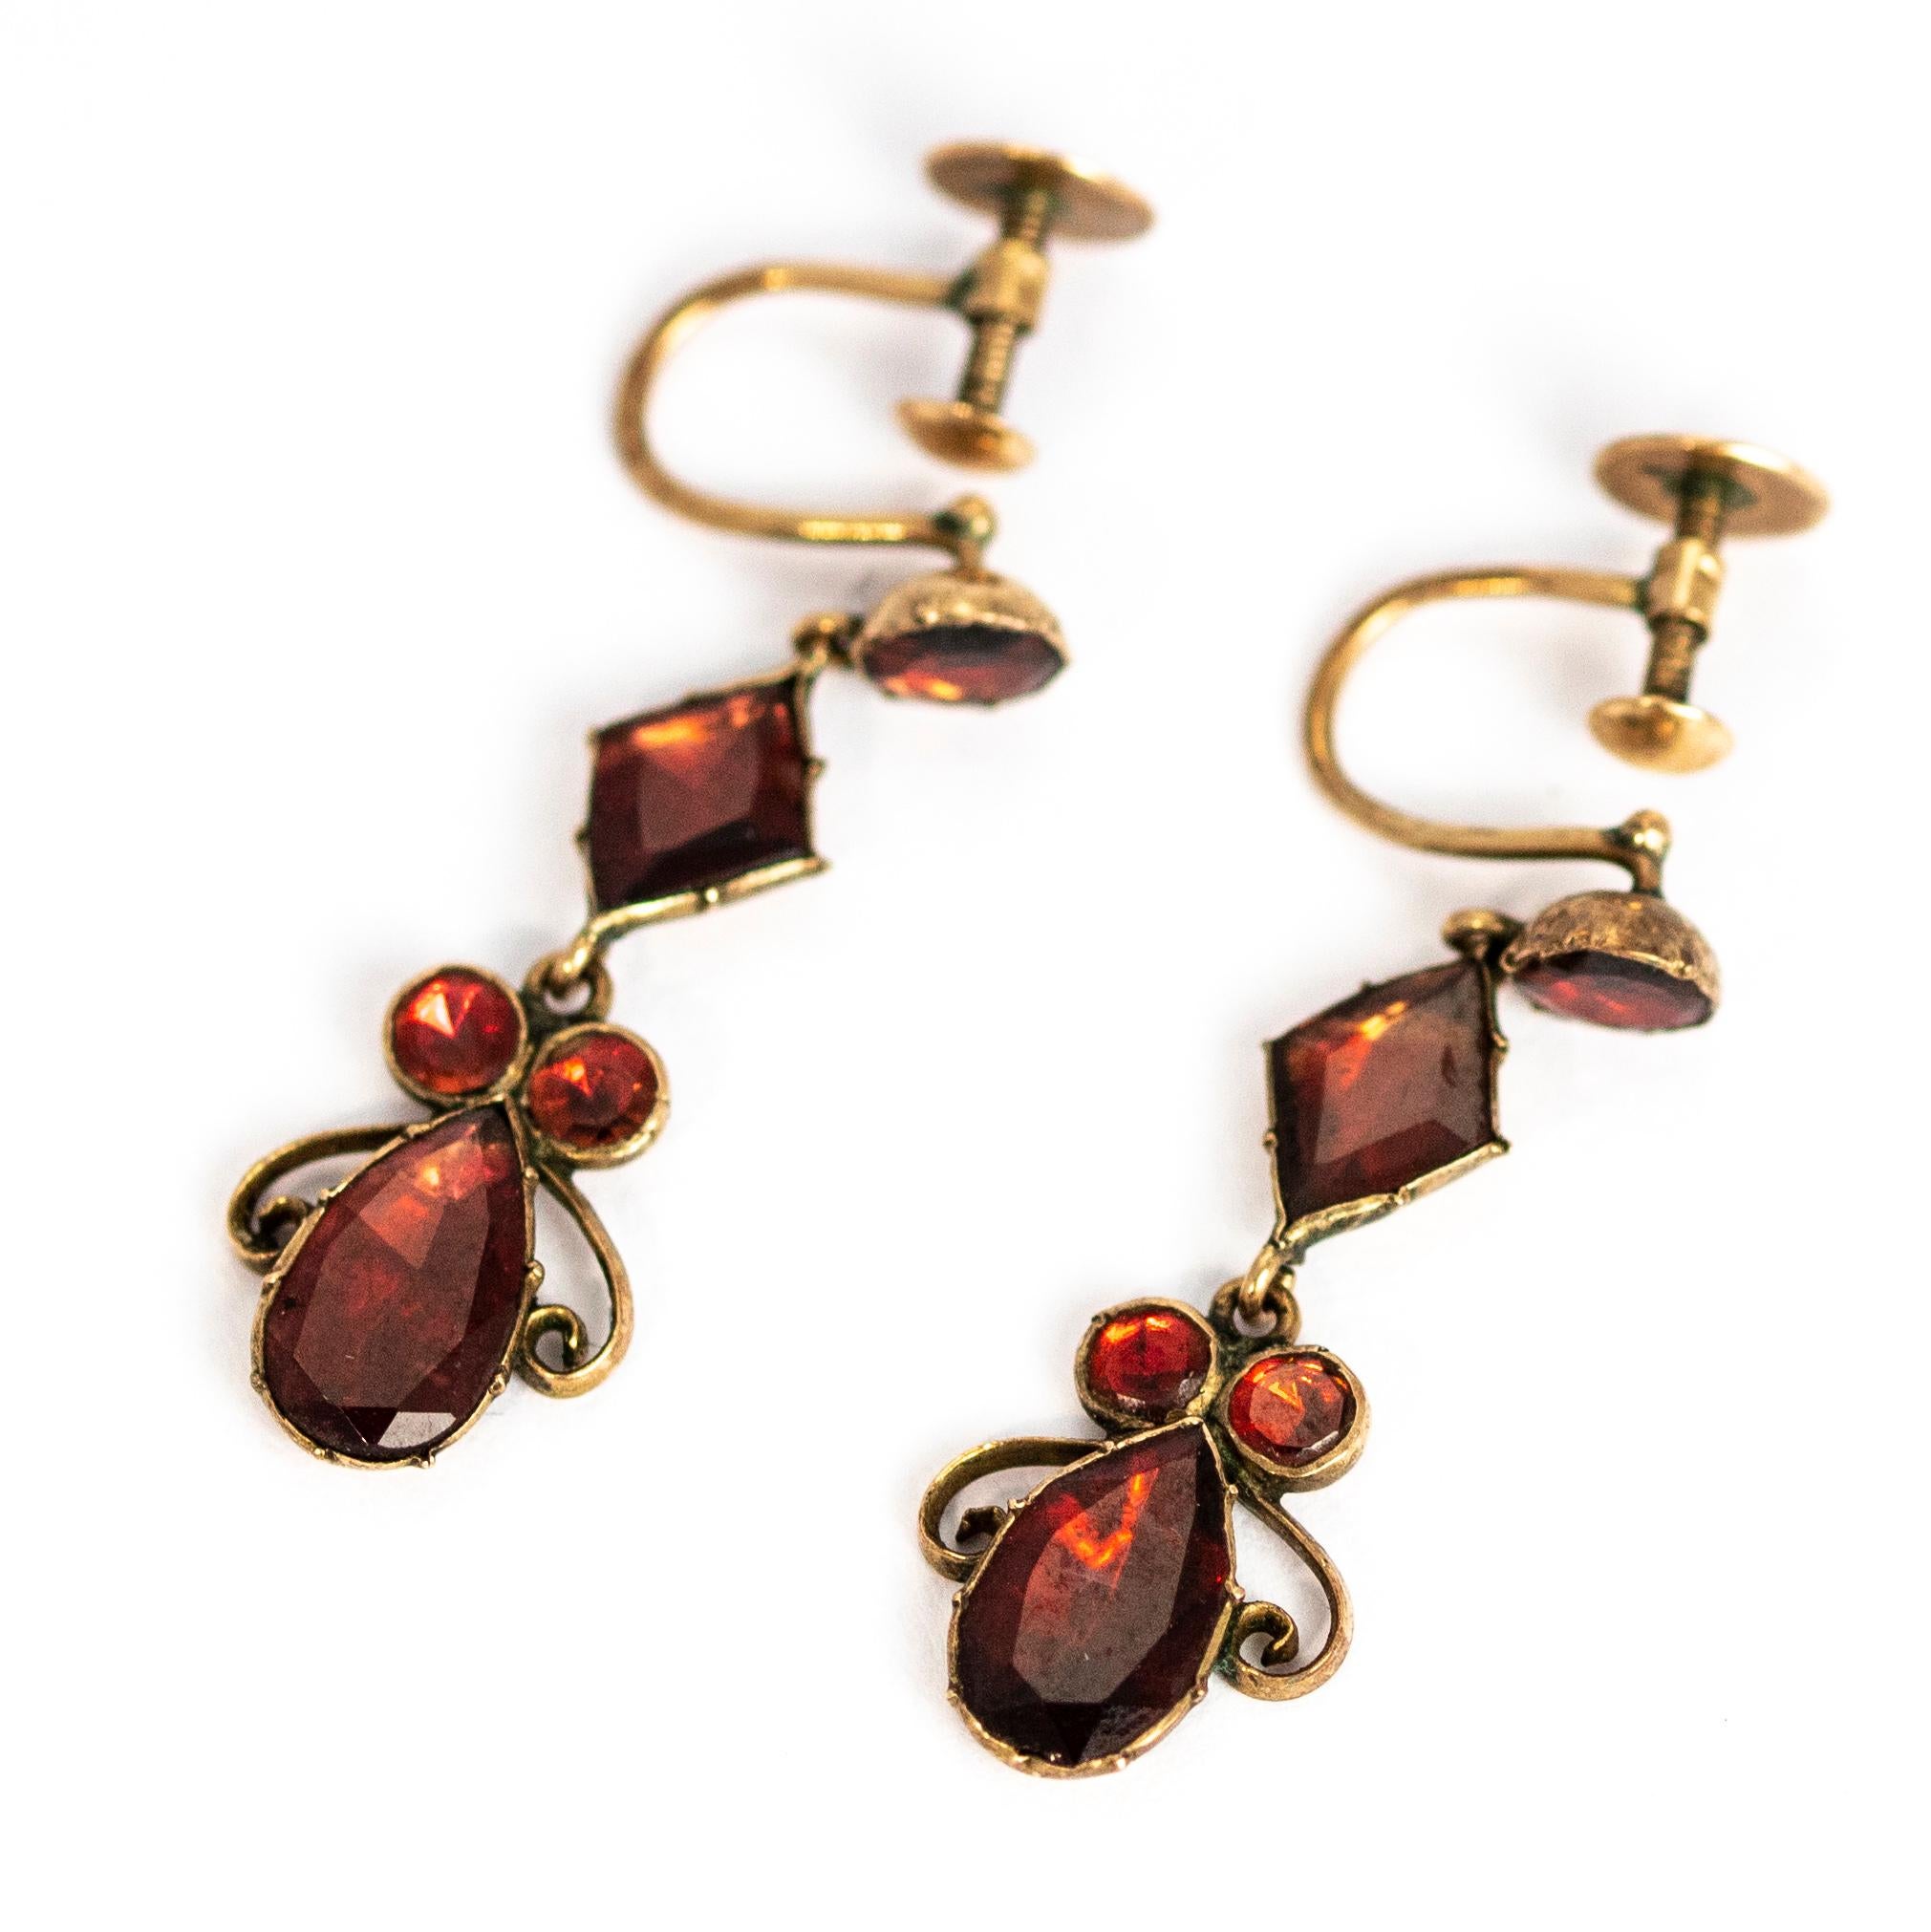 These stunning flat cut garnet and gold earrings are worn using a screw back and are very comfortable to wear. The drop part of the earring features some scroll detail and all the stones have a wonderful sheen to them.

Drop Length: 29mm 